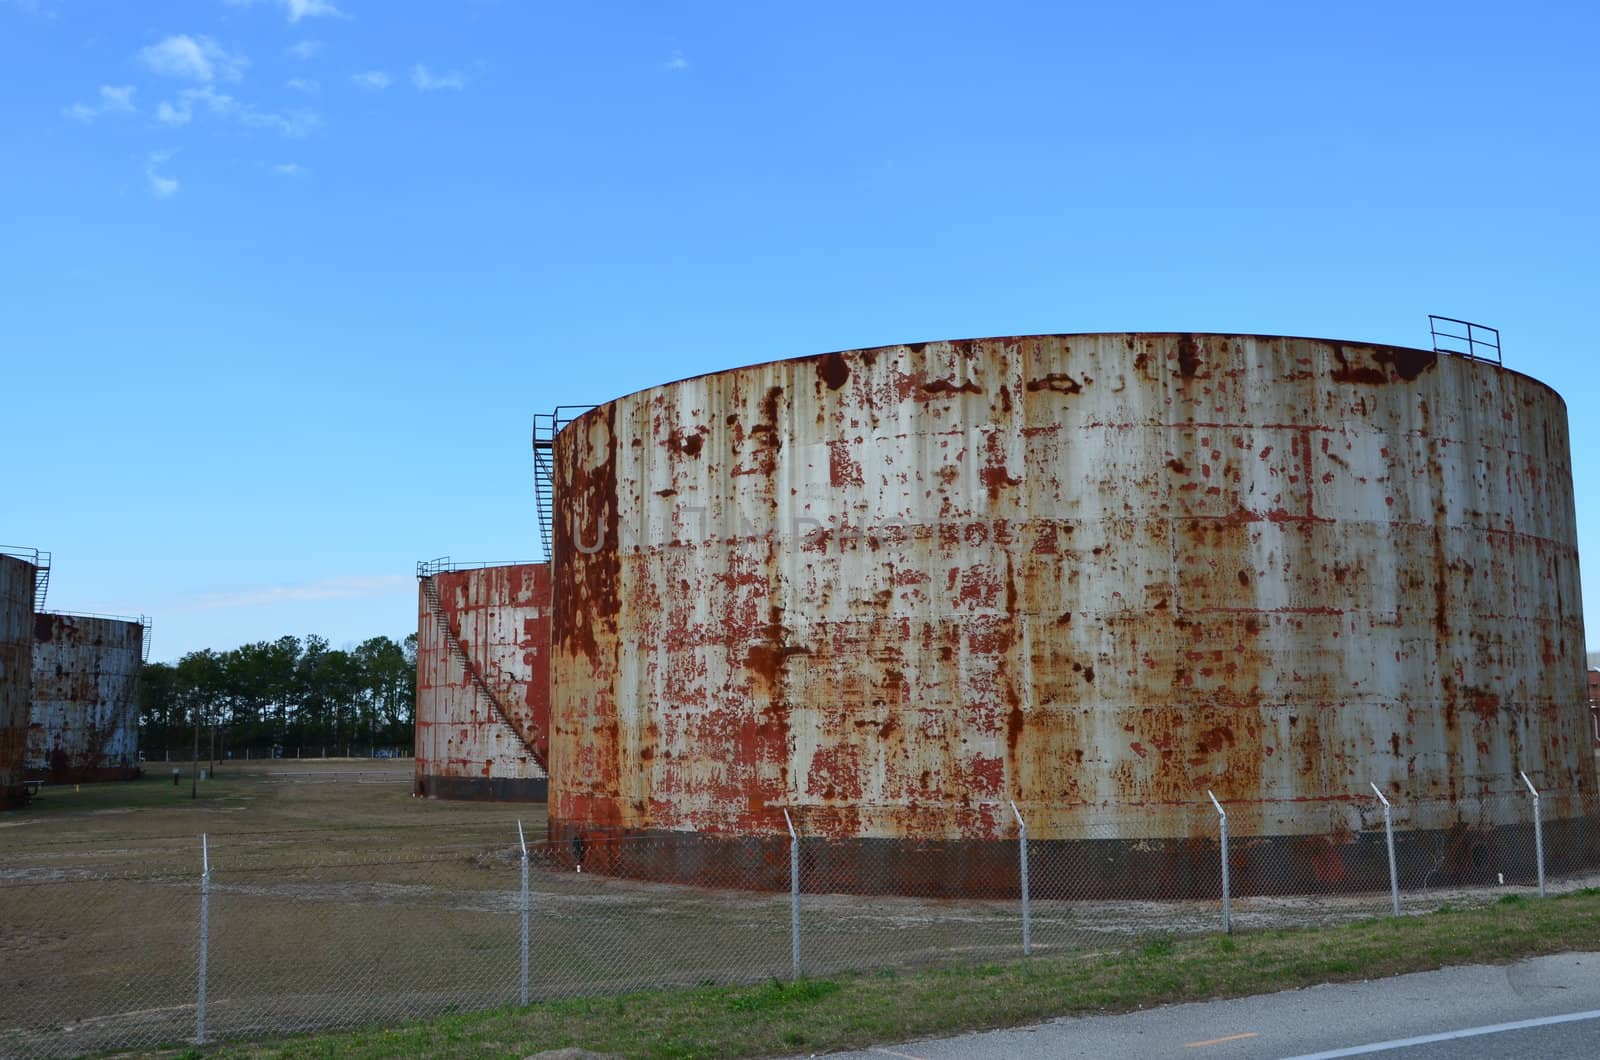 Oil Tanks by northwoodsphoto